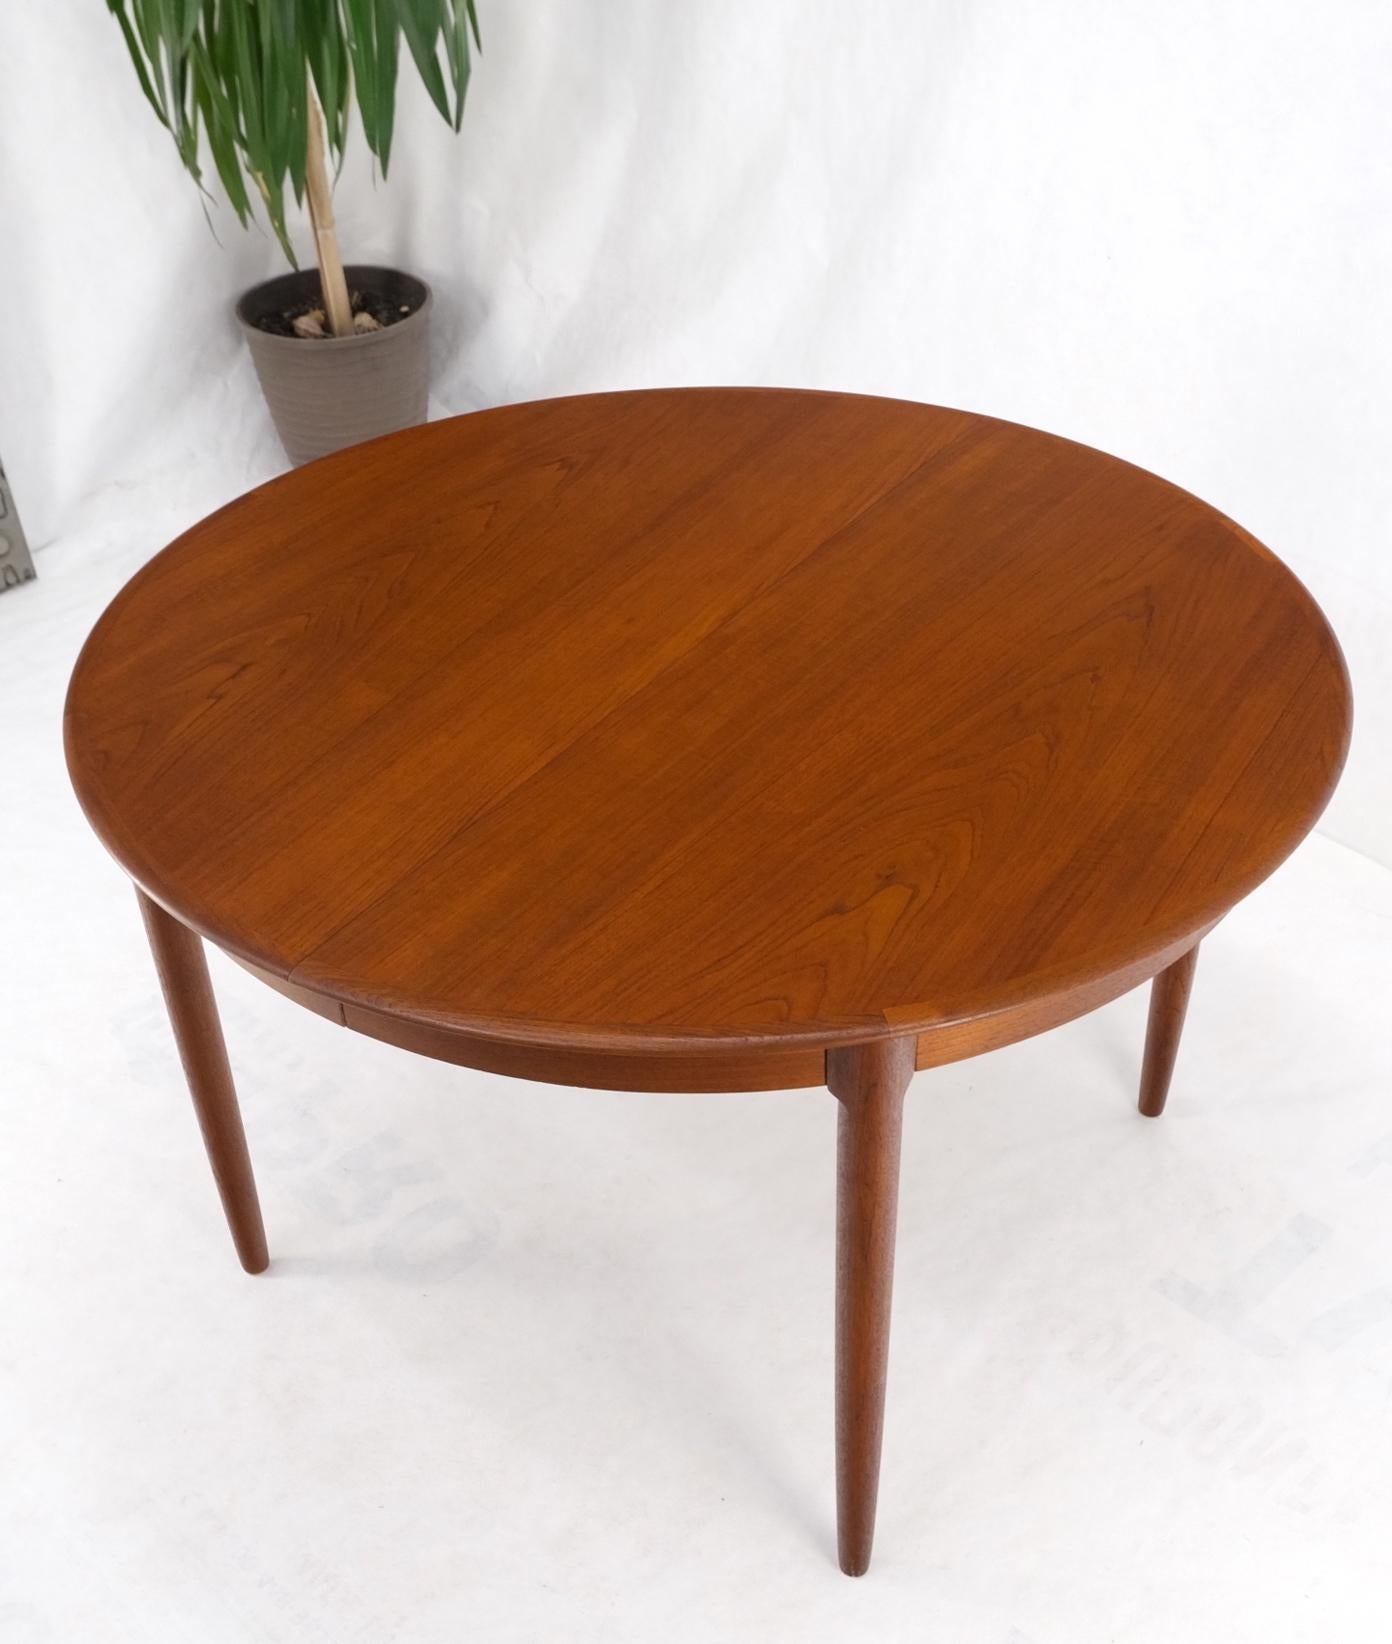 Danish Teak Mid-Century Modern Round Dining Table w/ Two Extension Boards Leafs For Sale 3